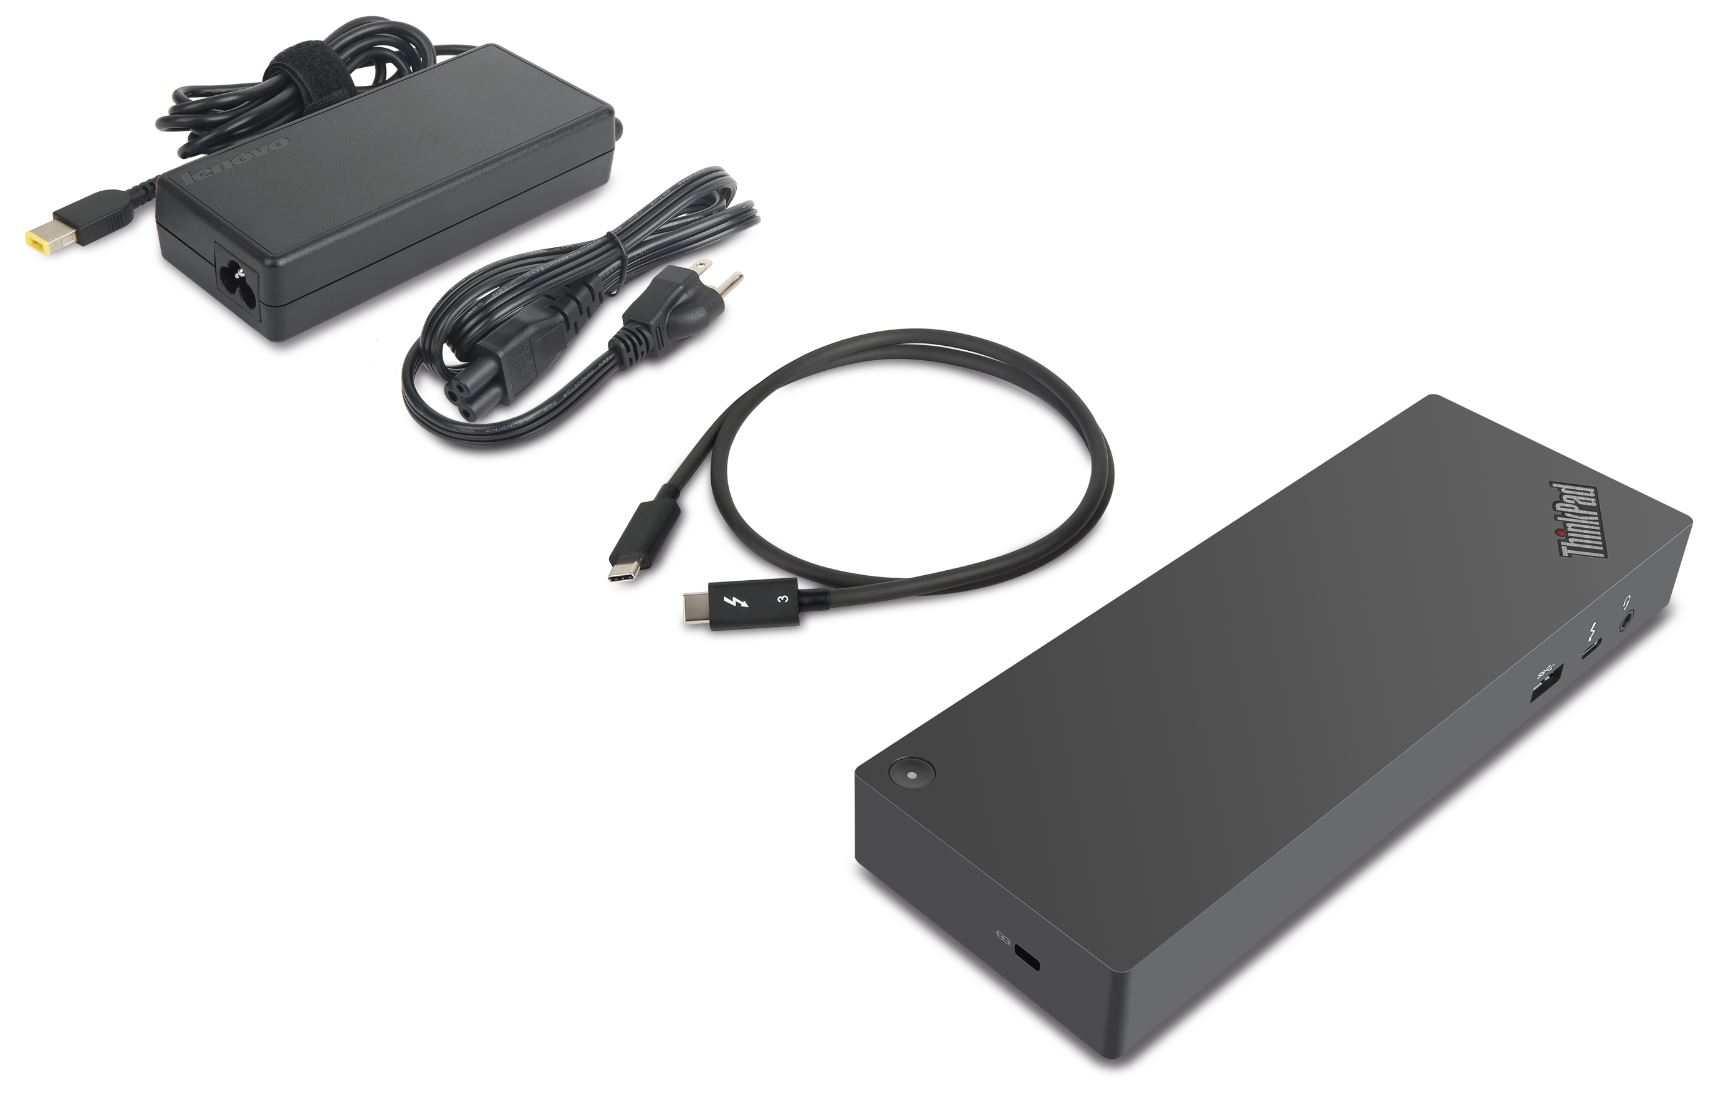 ThinkPad Thunderbolt 3 Dock Gen 2 - Overview and Service Parts 